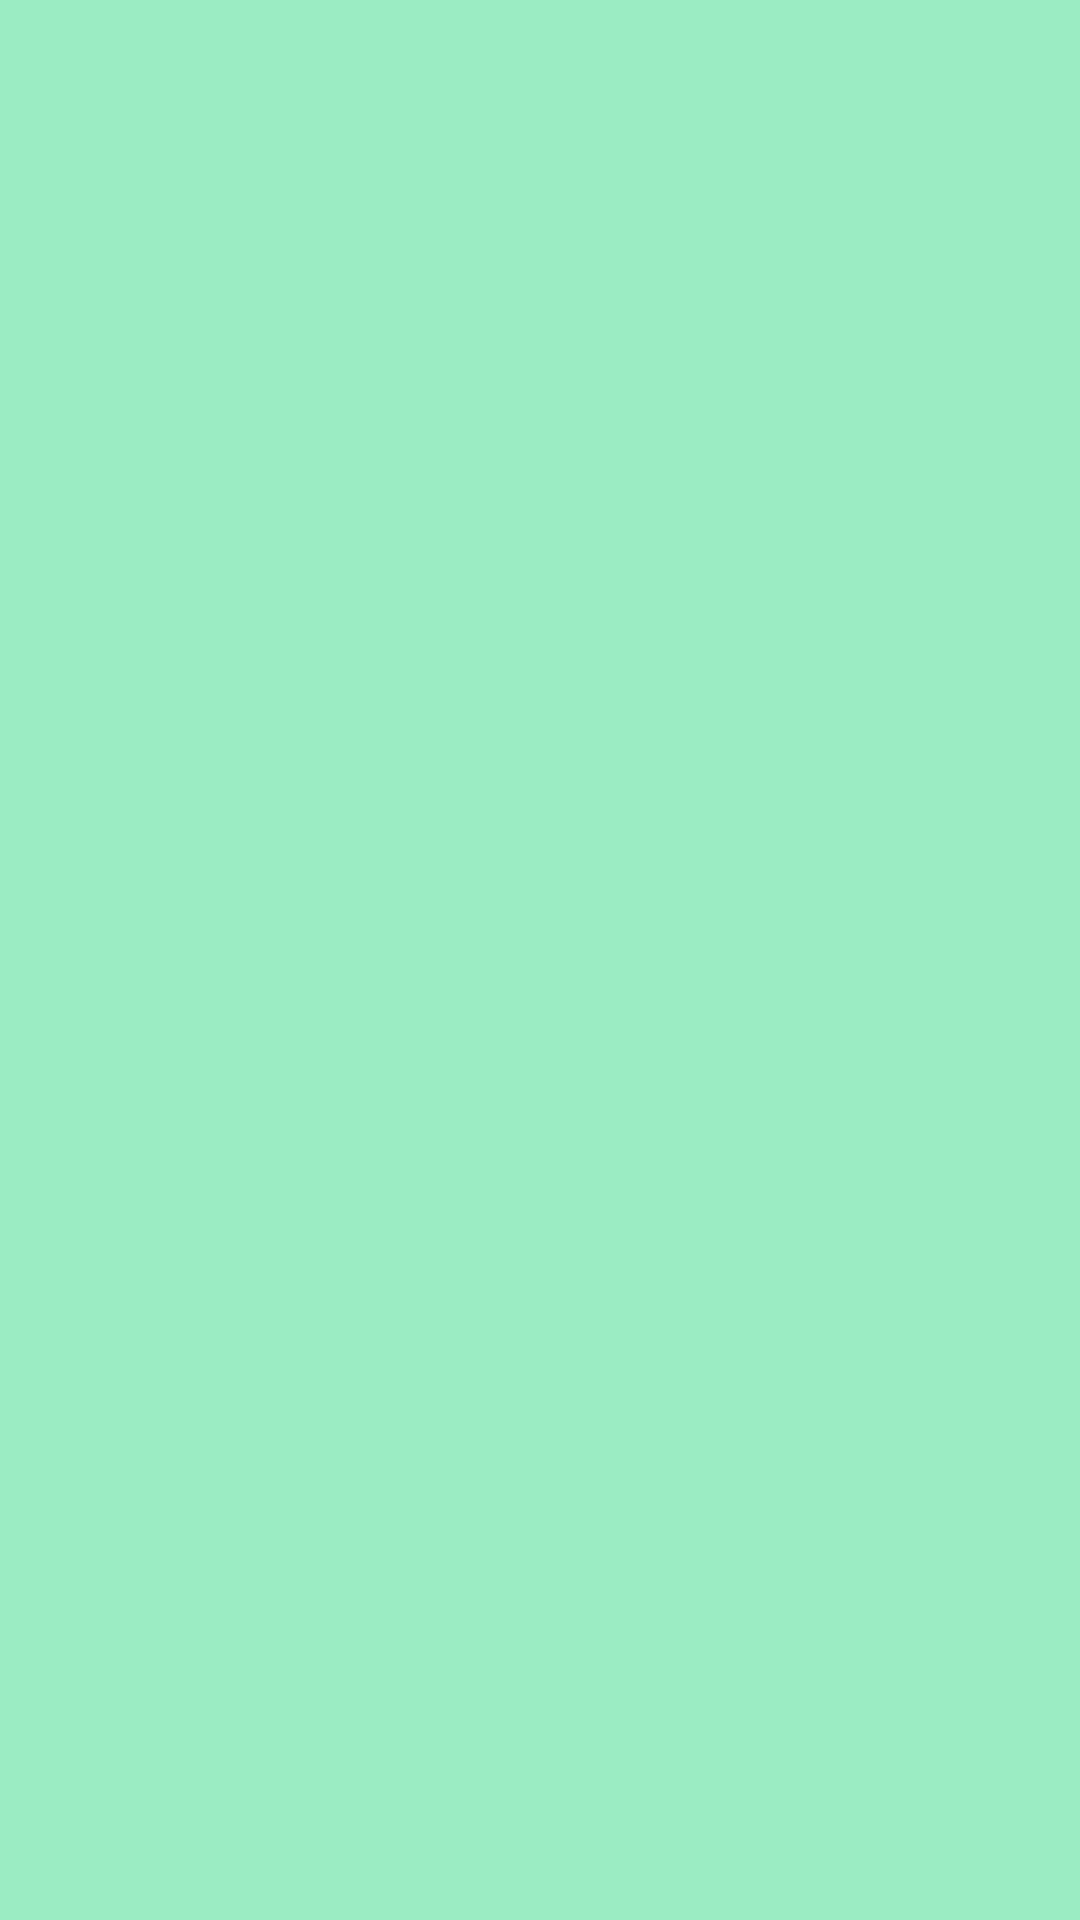 40 Mint Green Wallpaper Backgrounds For Iphone  Mint wallpaper Mint green  wallpaper Plain wallpaper iphone